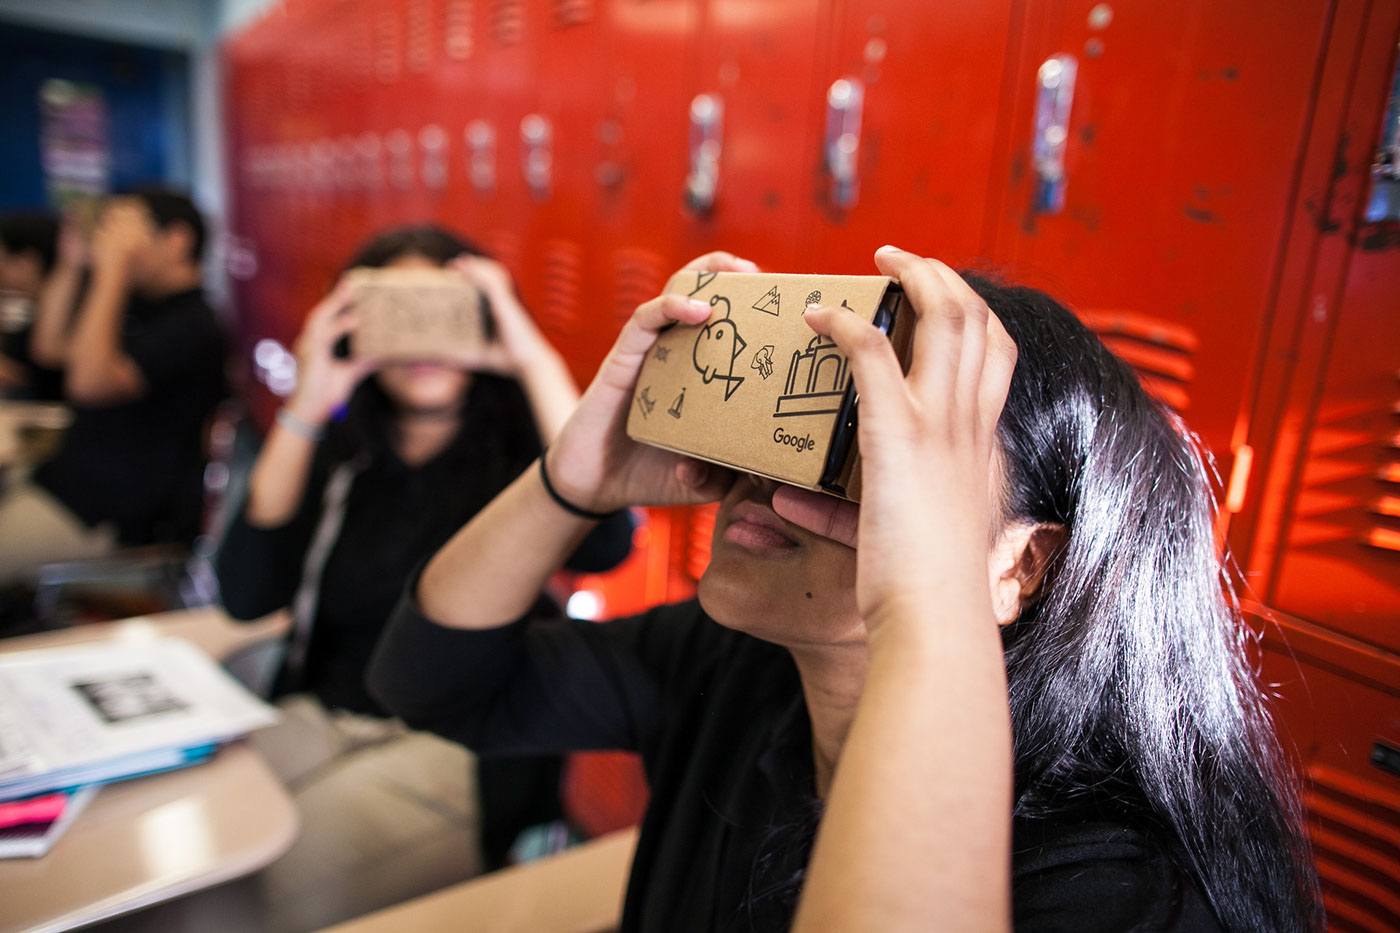 Google Expeditions 